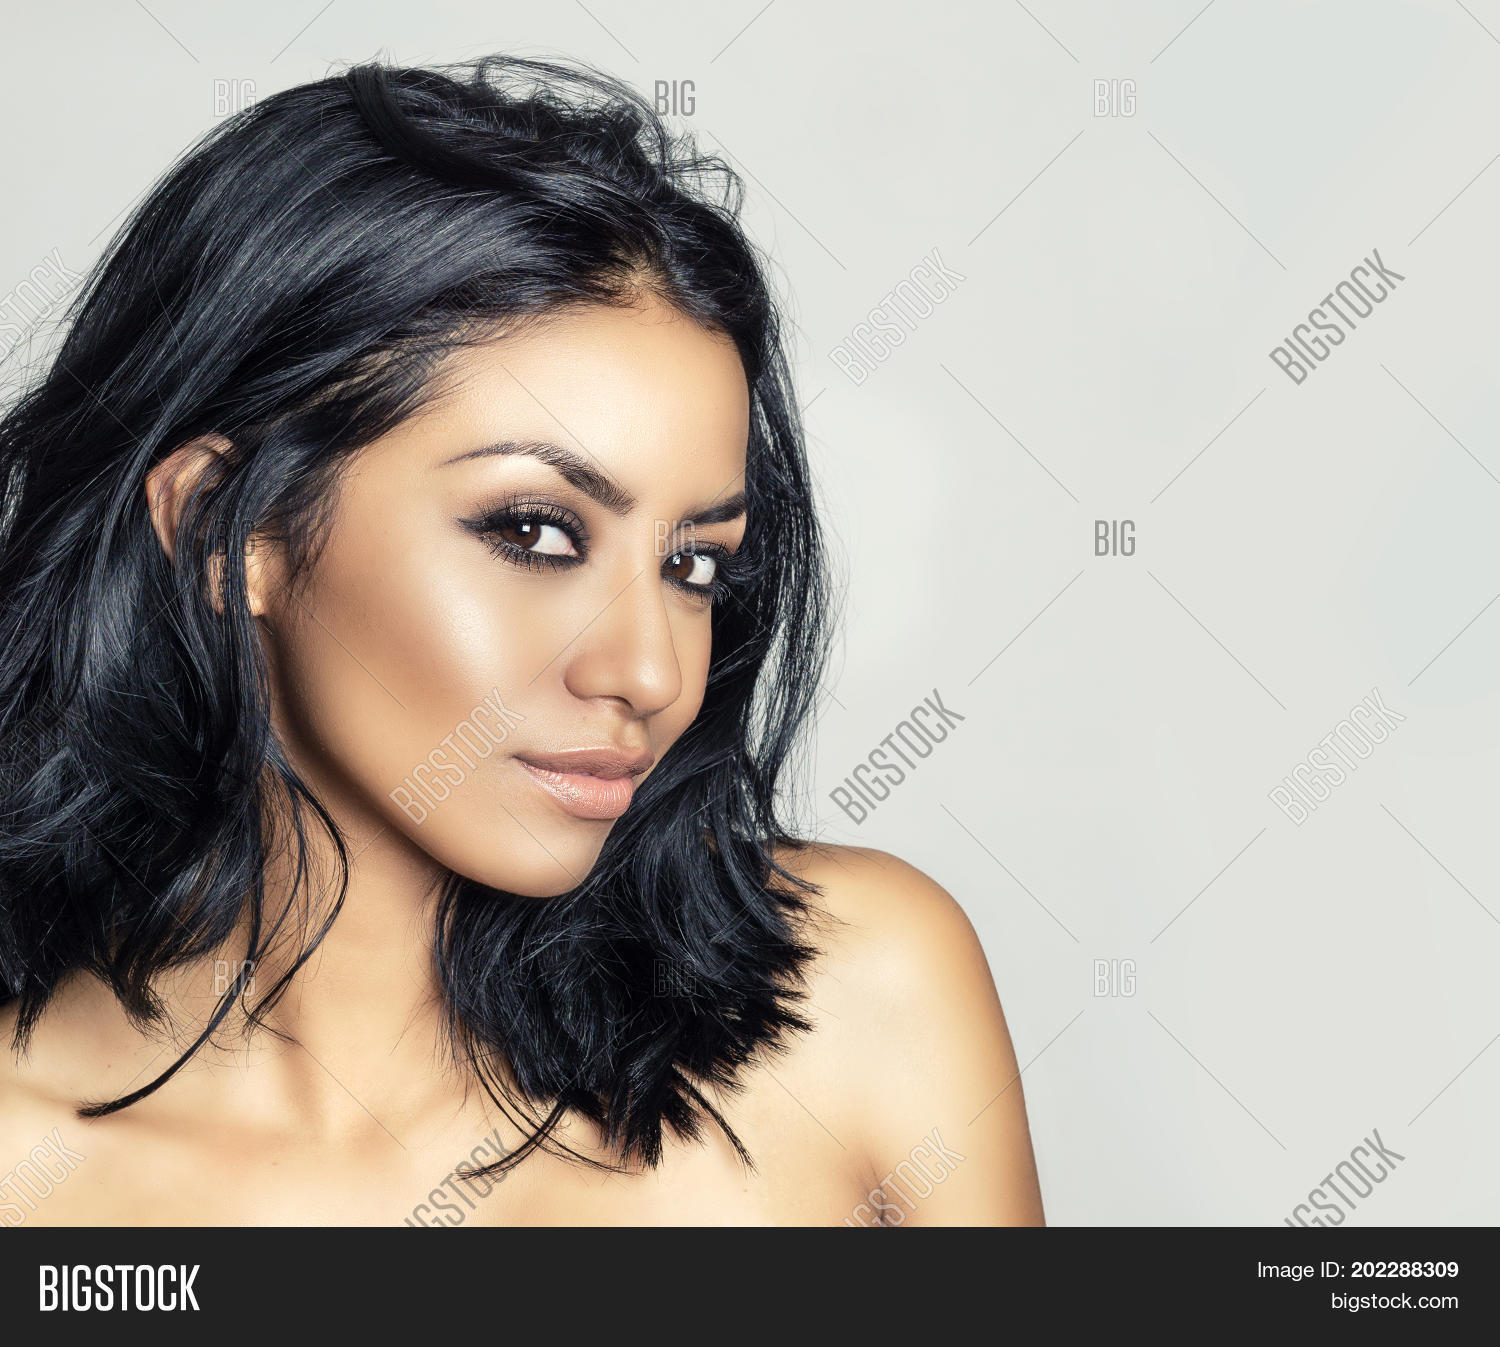 Beautiful Young Woman's Face Sly Image & Photo | Bigstock